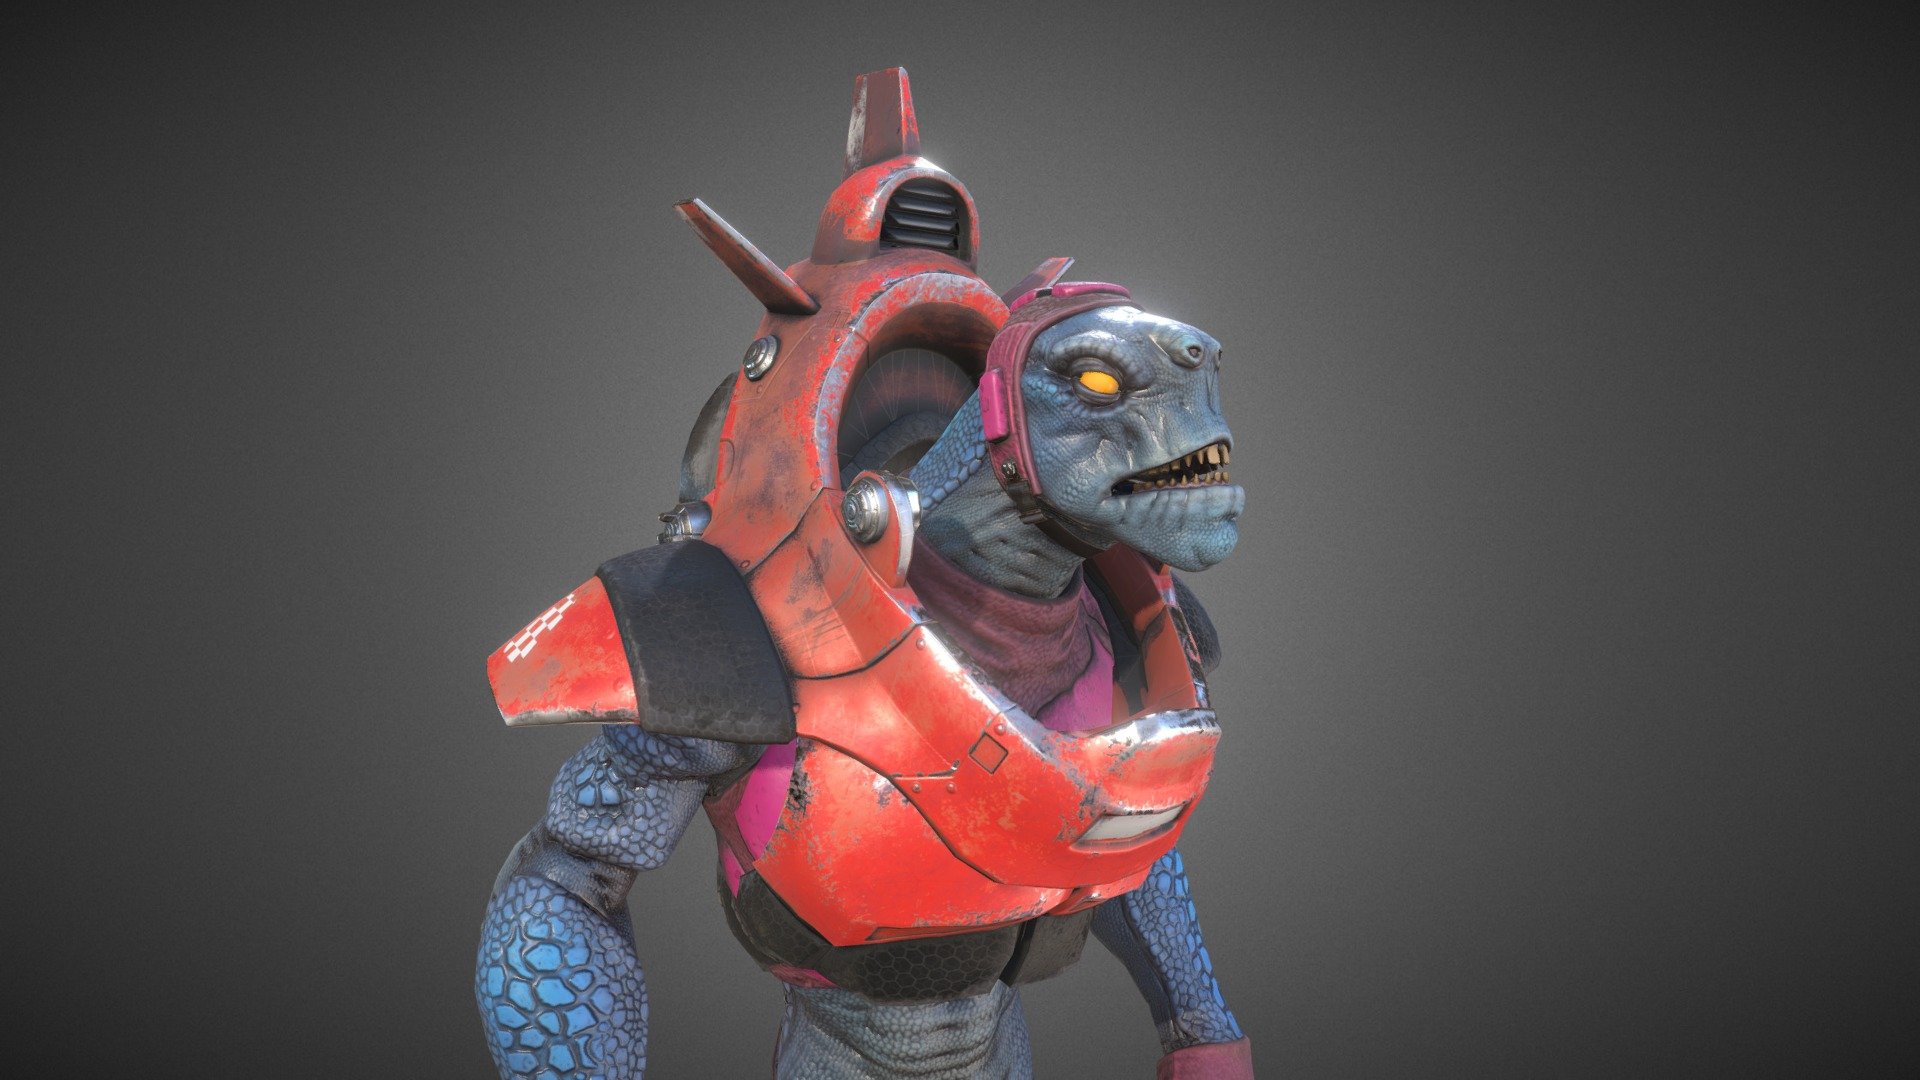 Character done for a tutorial that is part of the advanced character production classes. The goal was to teach how to model, texture, skin and finalize a character with organic (reptilian) parts and hard surface parts in UE4. 

Softwares used are ZBrush, 3DCoat, Substance Painter, Photoshop, Maya, XNormal, UE4.

The videos  (in French so far) are on Youtube: https://www.youtube.com/channel/UCMDLSguGSJEt6s1Y7kpGVqA/videos - Space Lizard - 3D model by fxmelard (@fx) 3d model